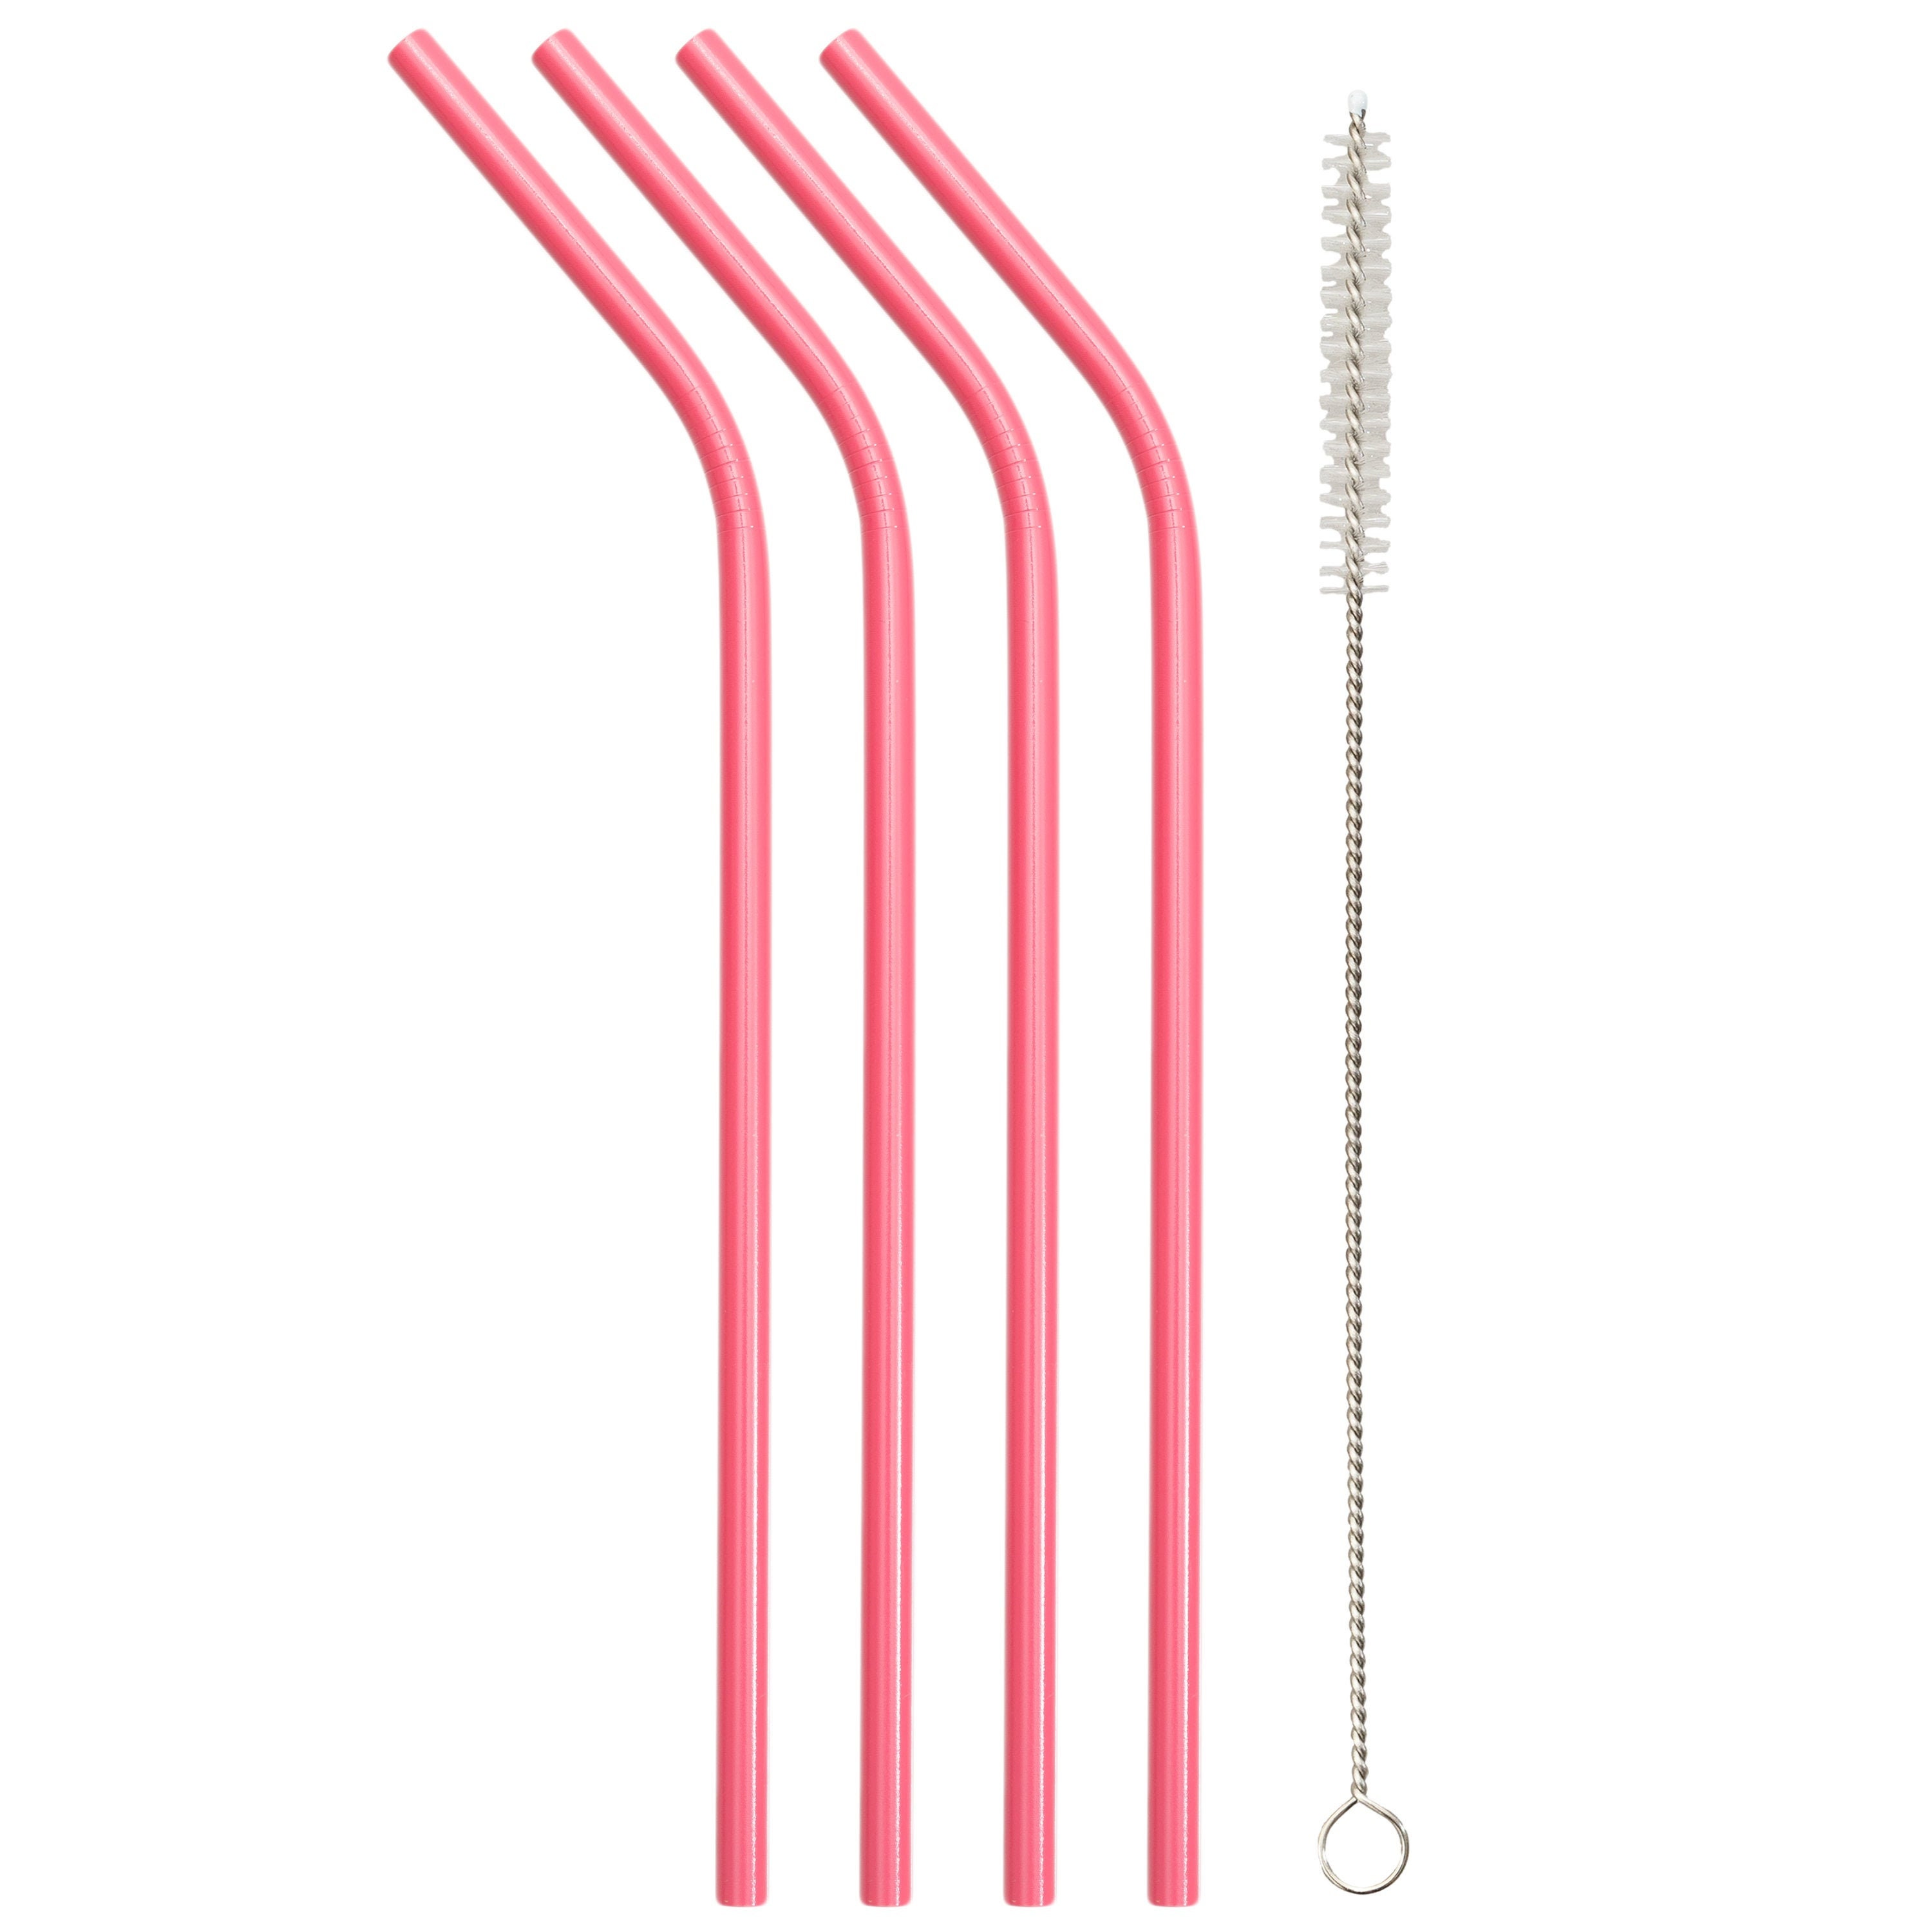 Metal Drinking Straws - Copper and Stainless Steel Straws Canada